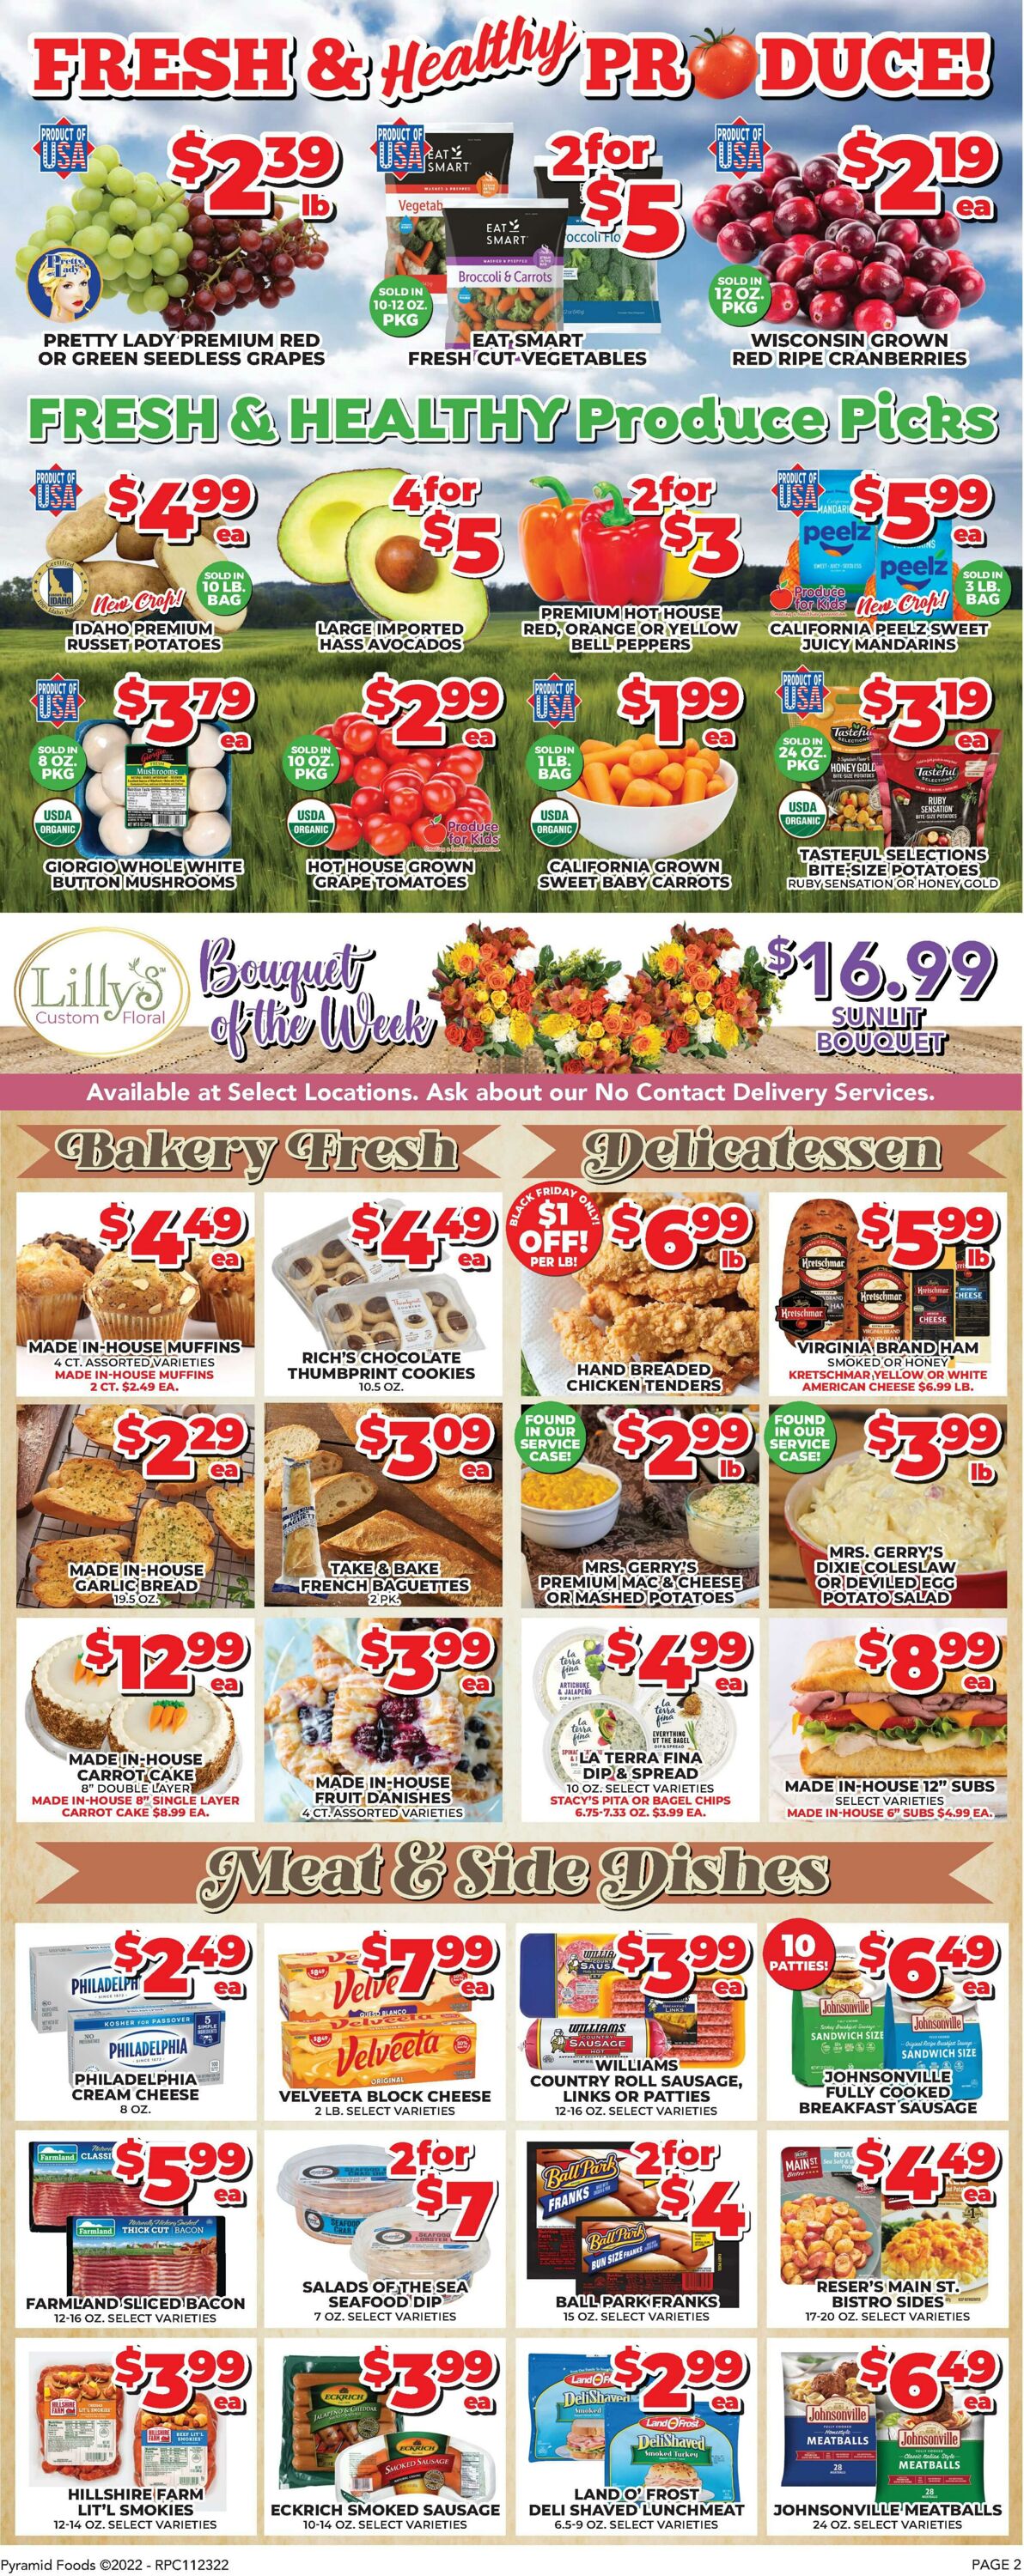 Weekly ad Price Cutter 11/23/2022 - 11/29/2022